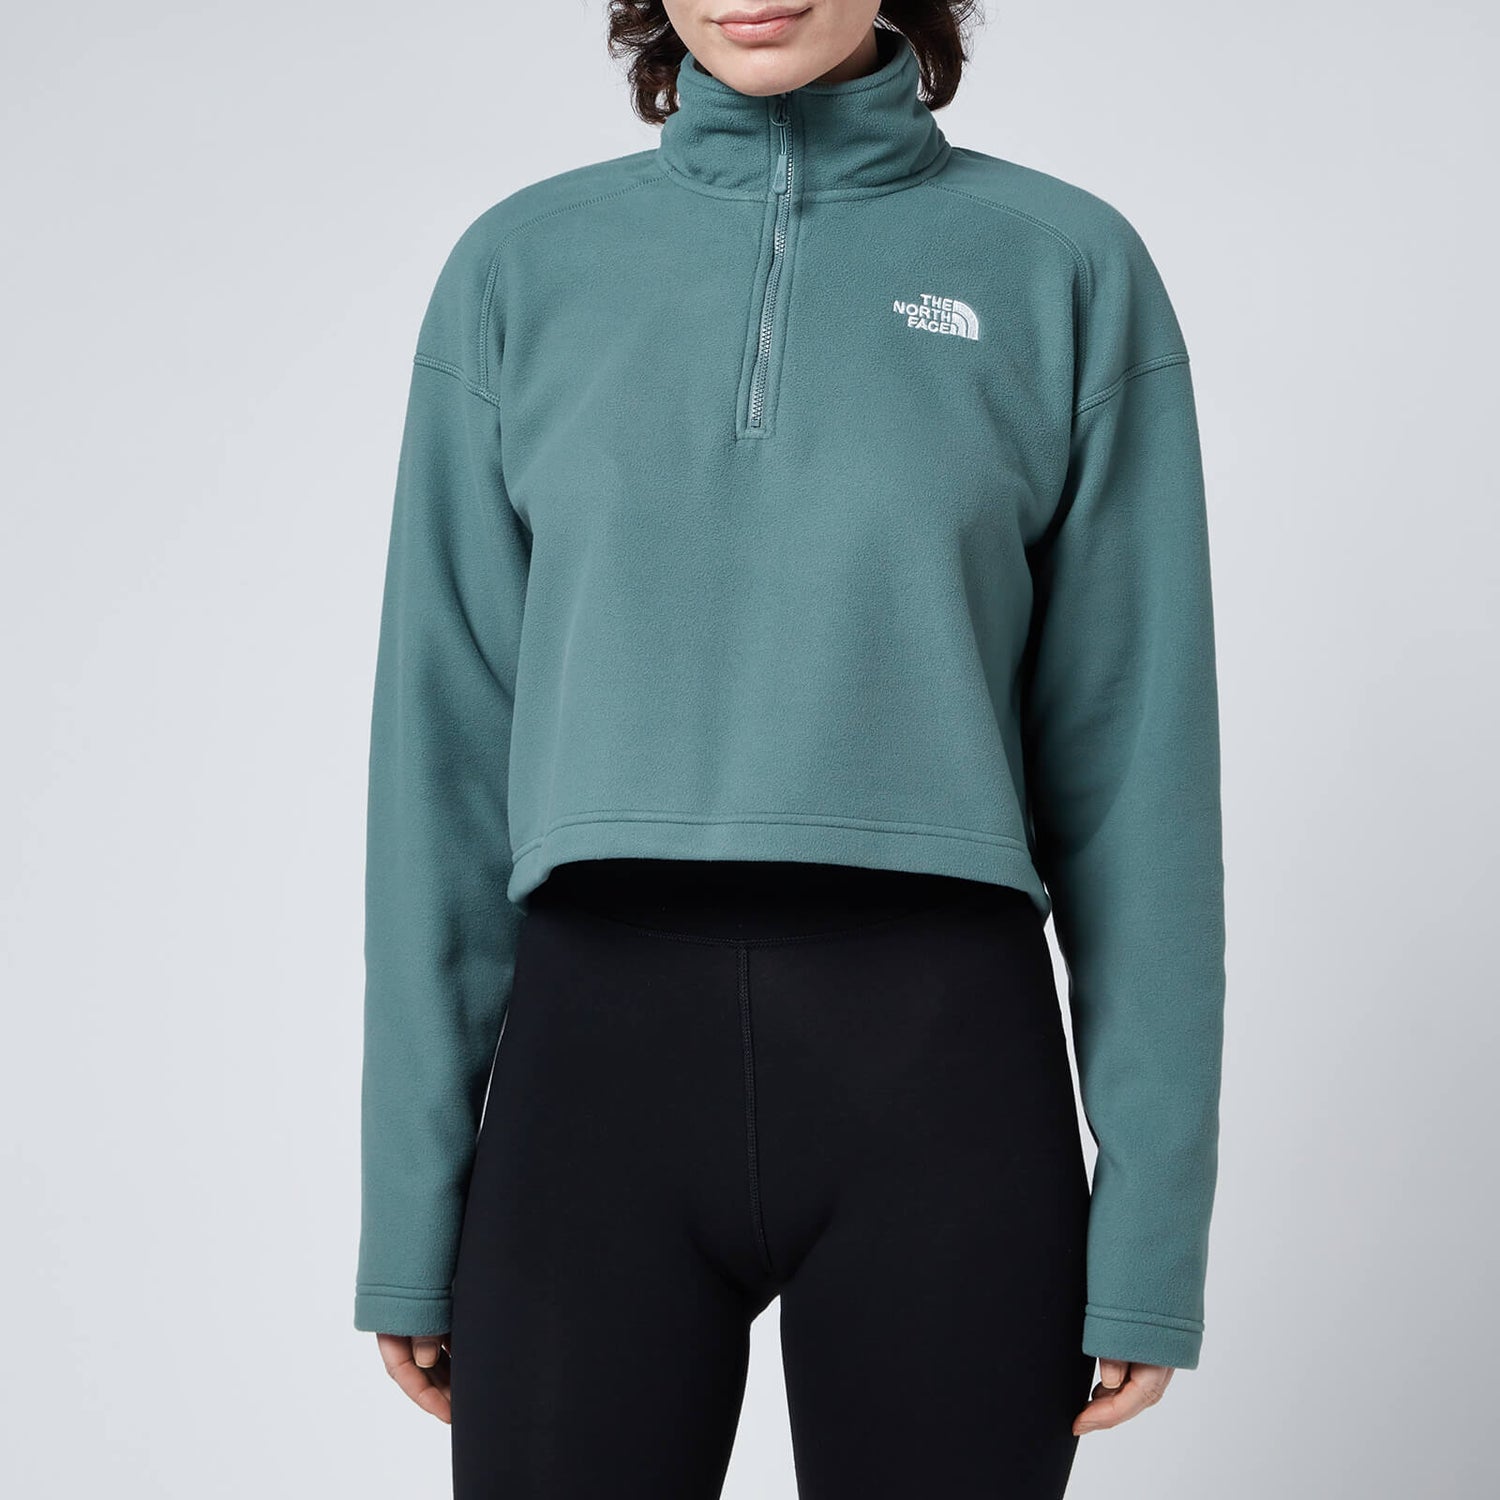 The North Face Women's Crop Glacier - Light Green - XS